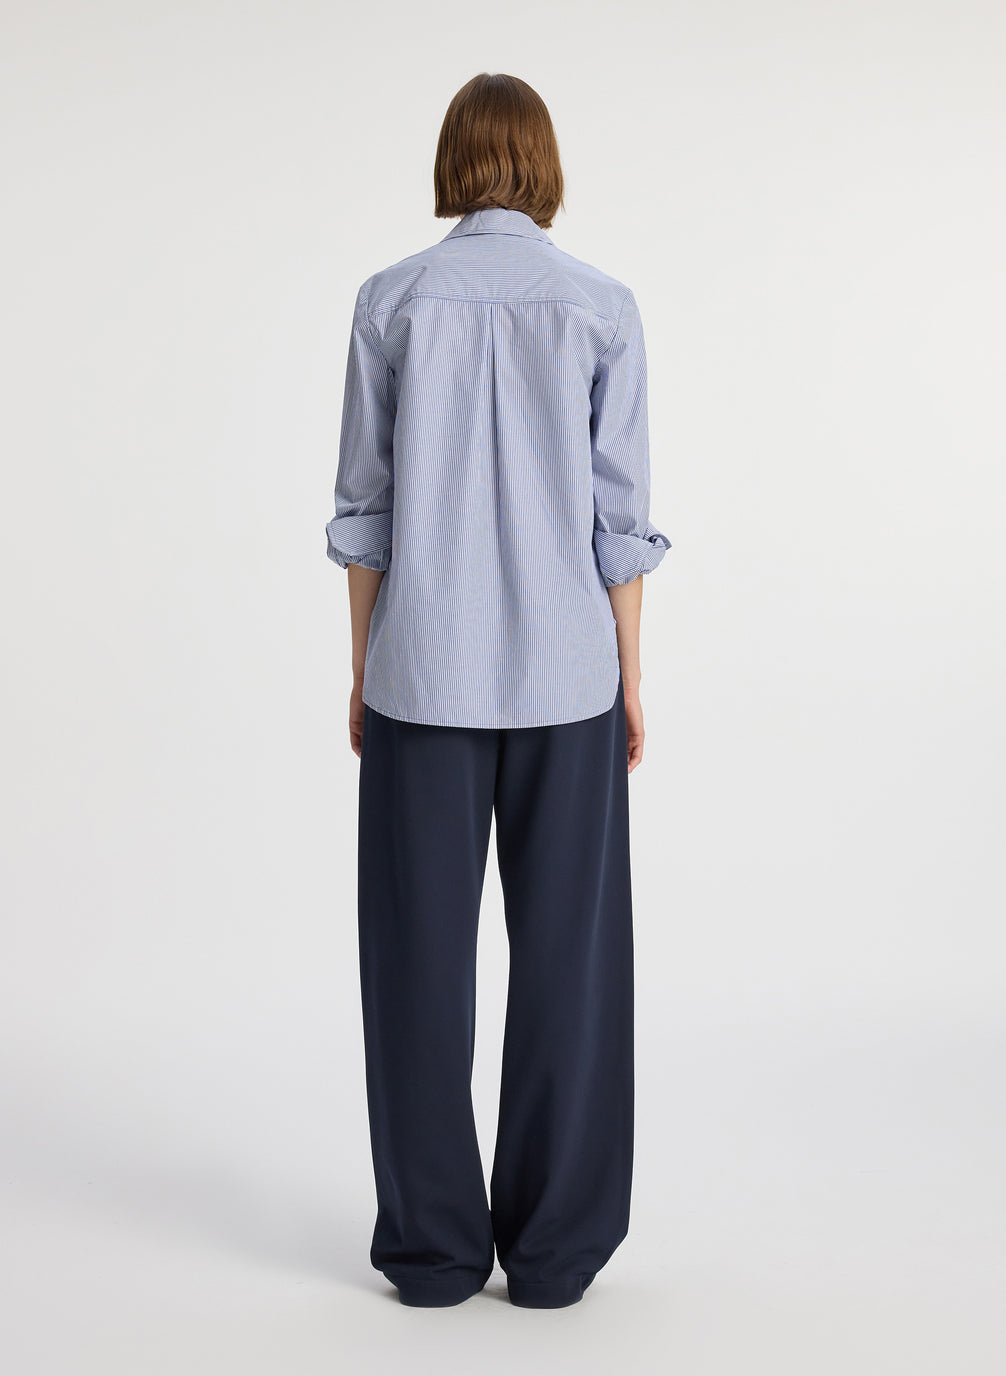 back  view of woman wearing blue striped buttoned shirt and navy blue pants